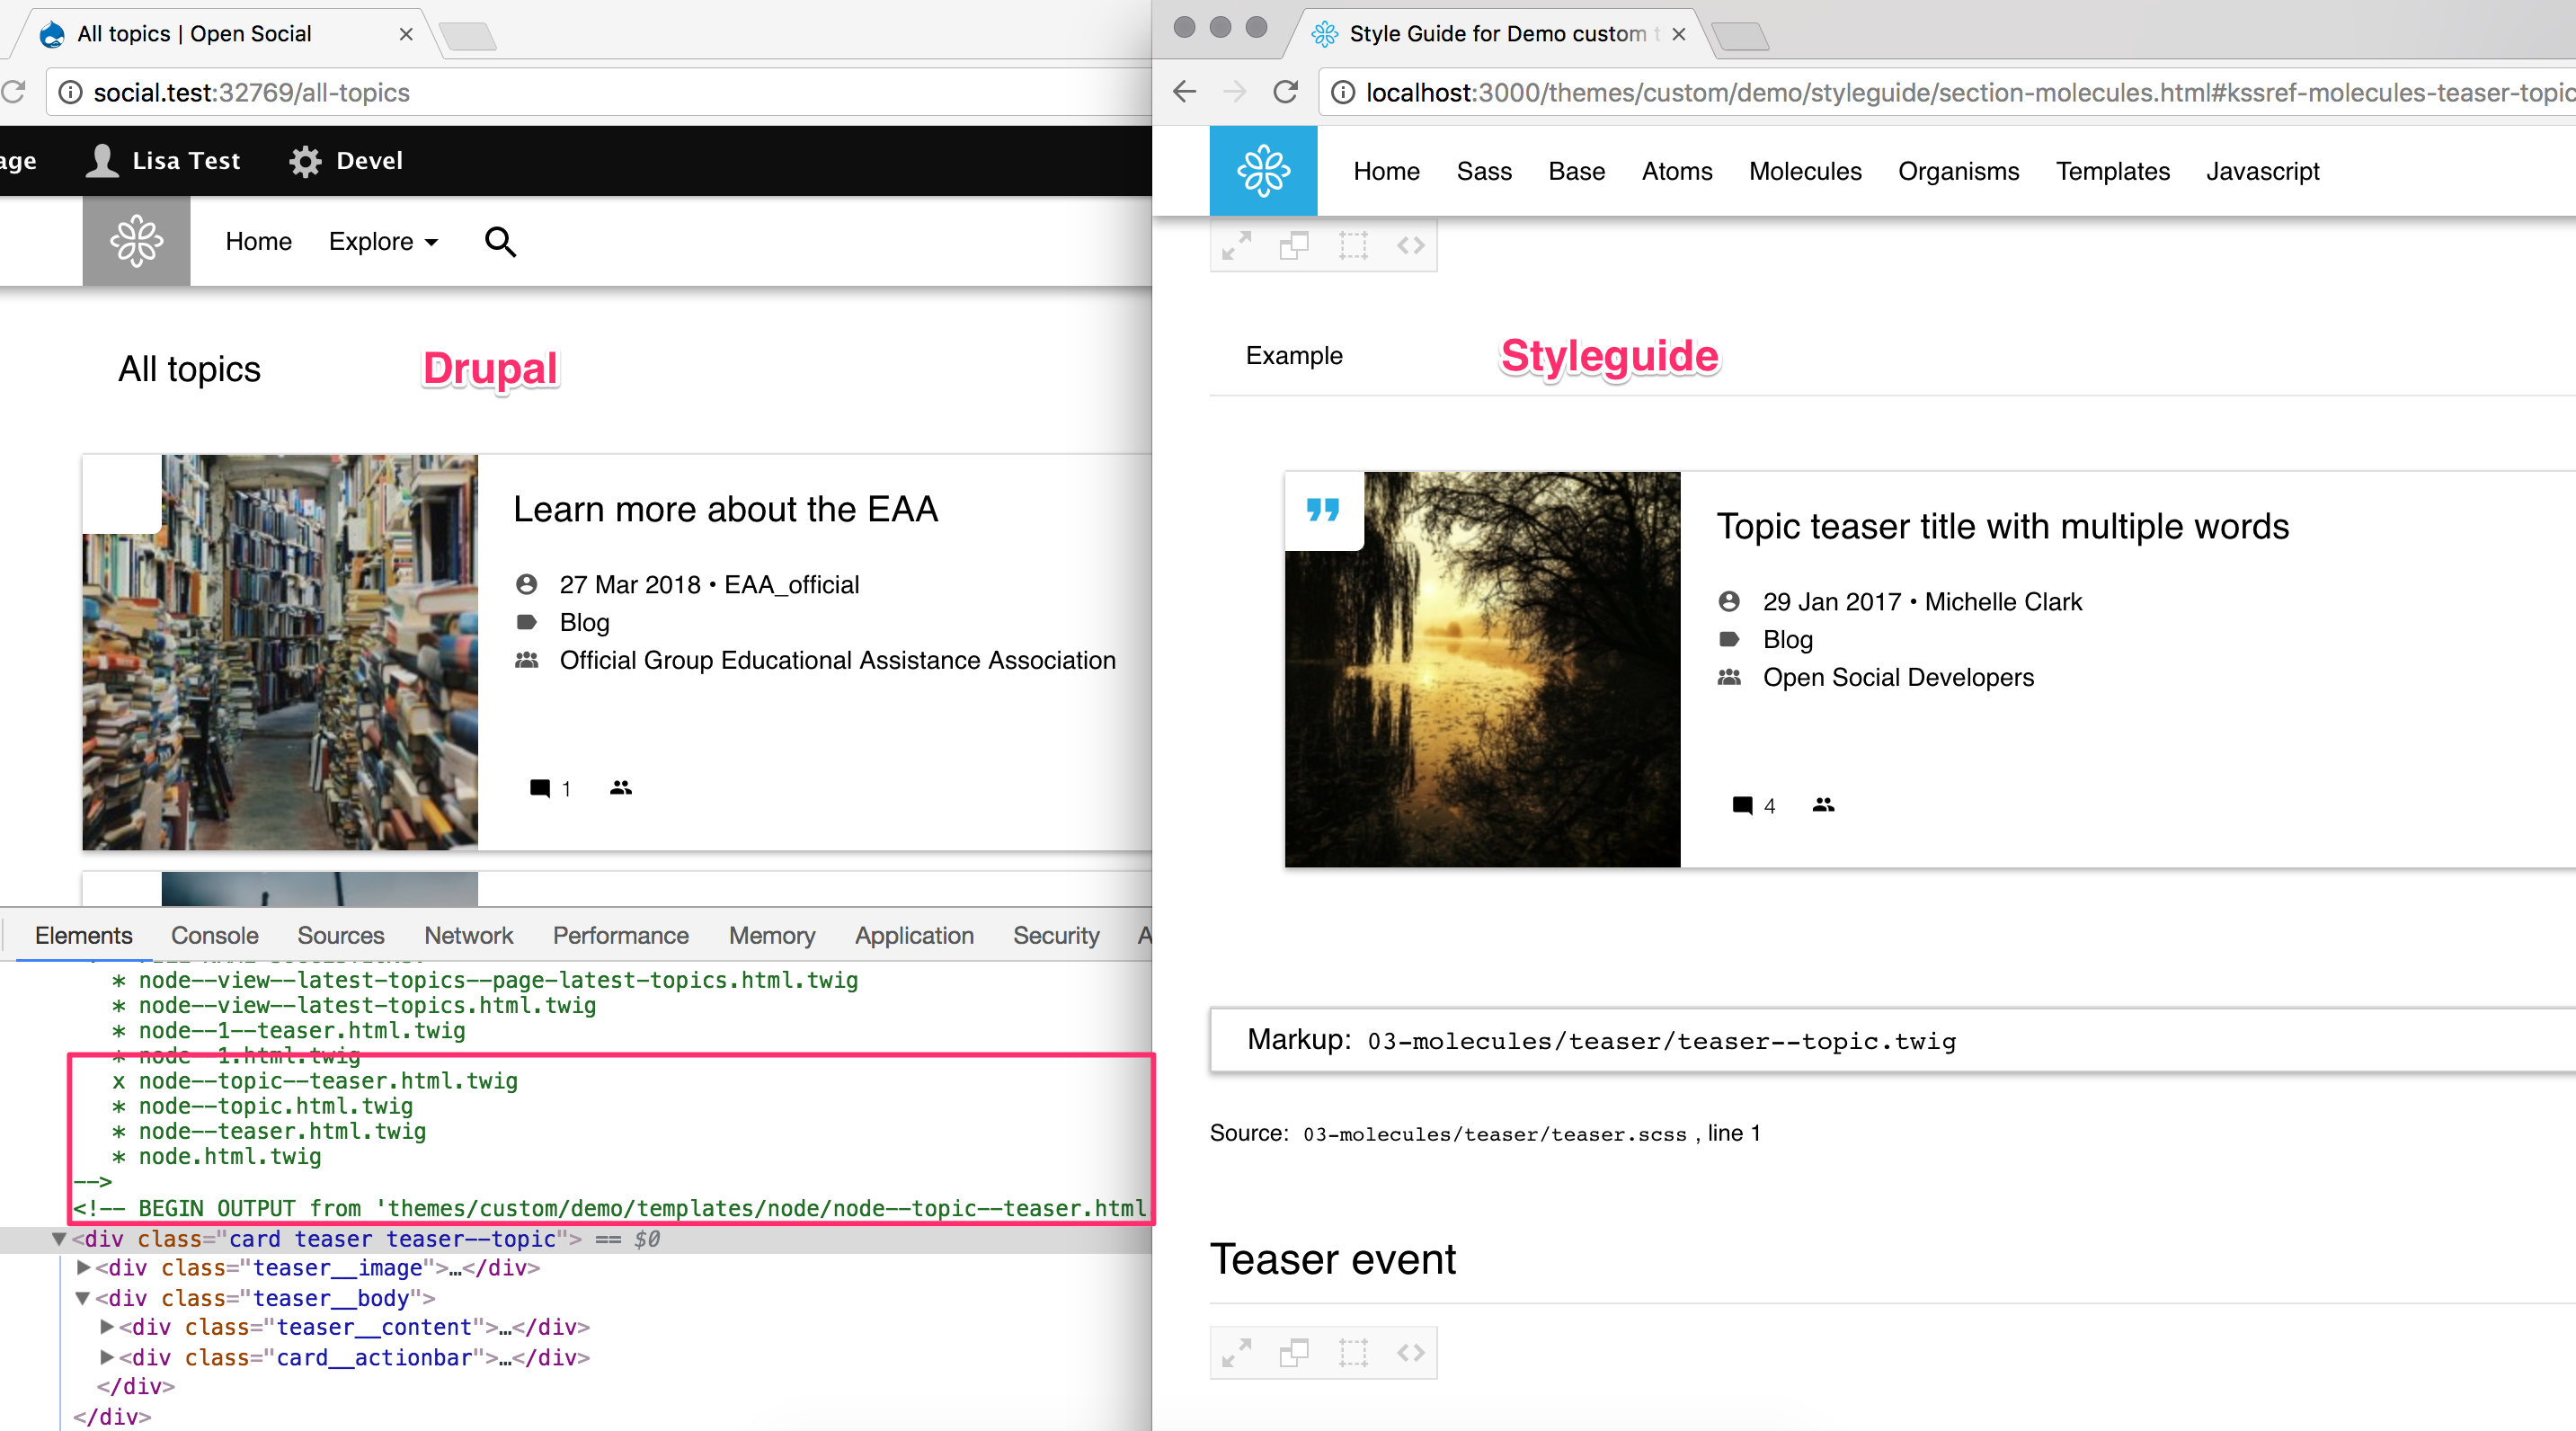 Screenshot of teasers in Drupal and in styleguide